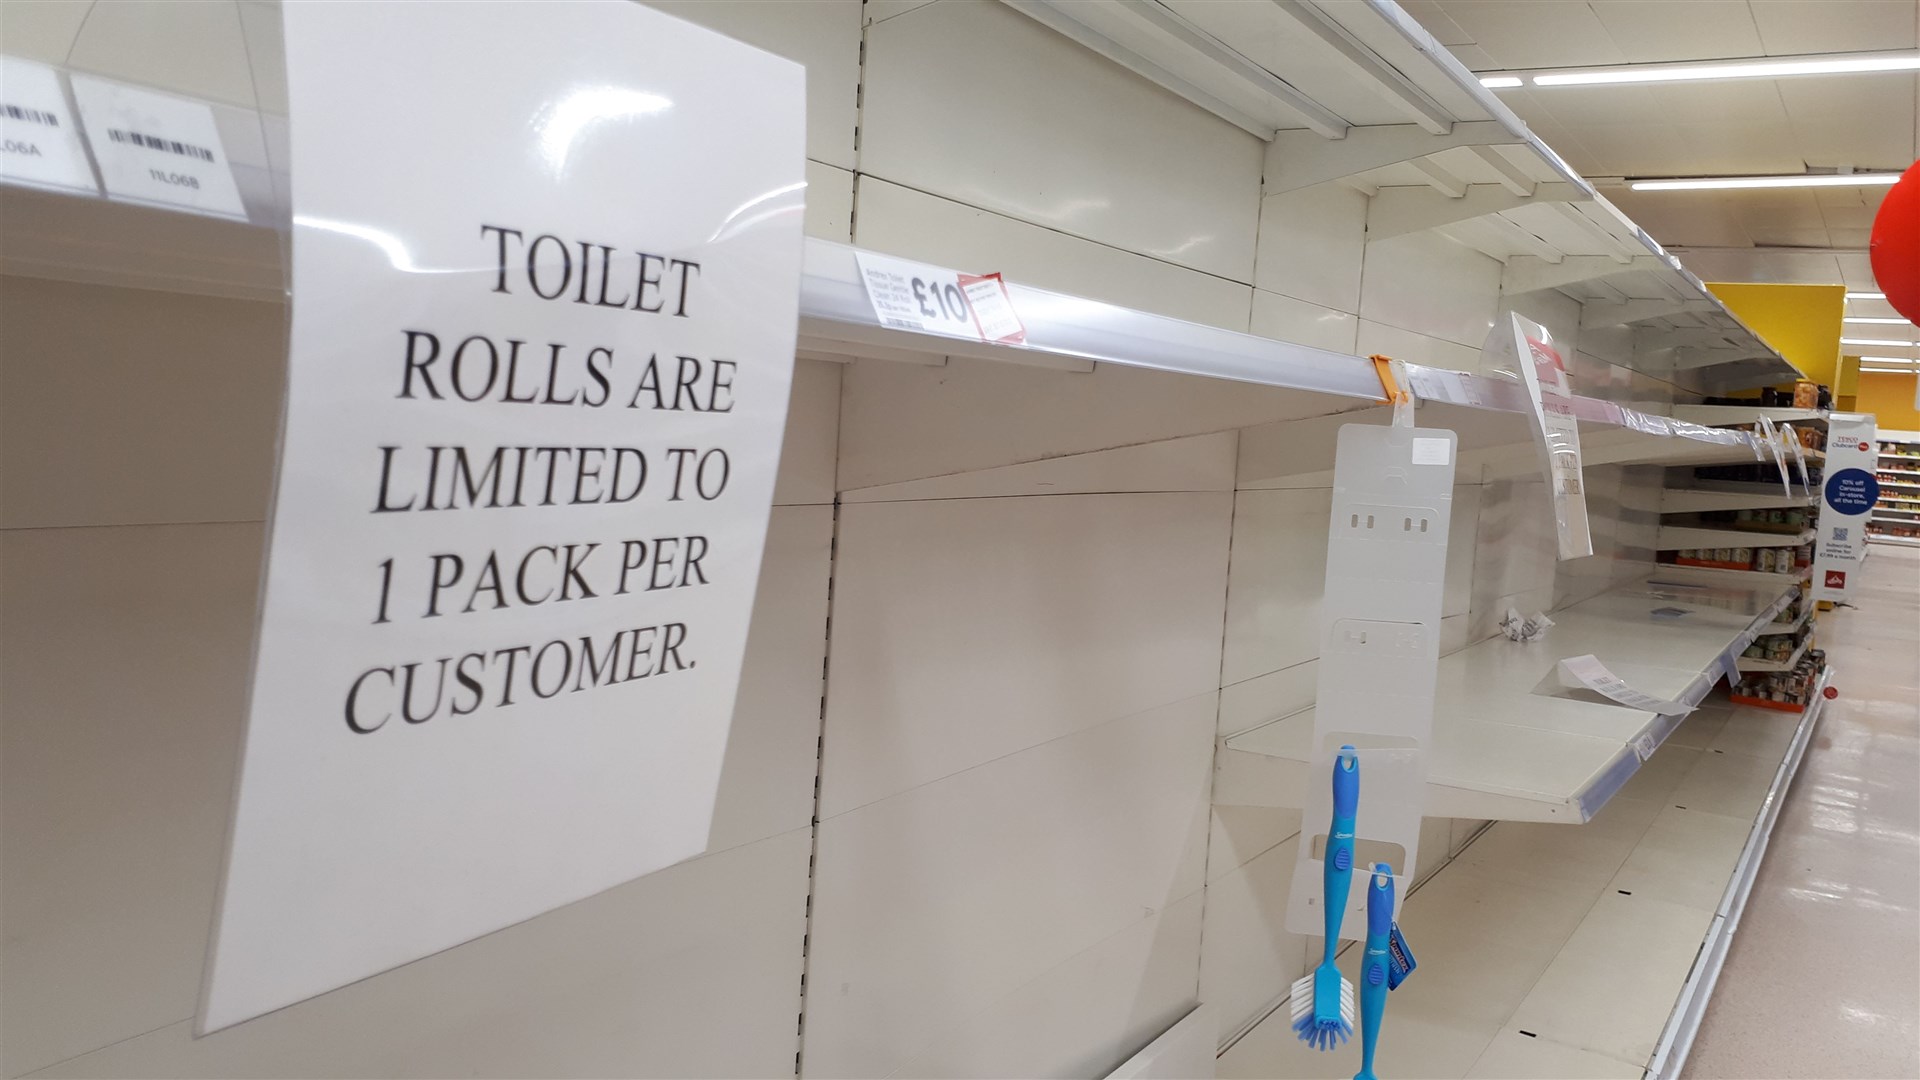 Toilet rolls assumed a new value for many.